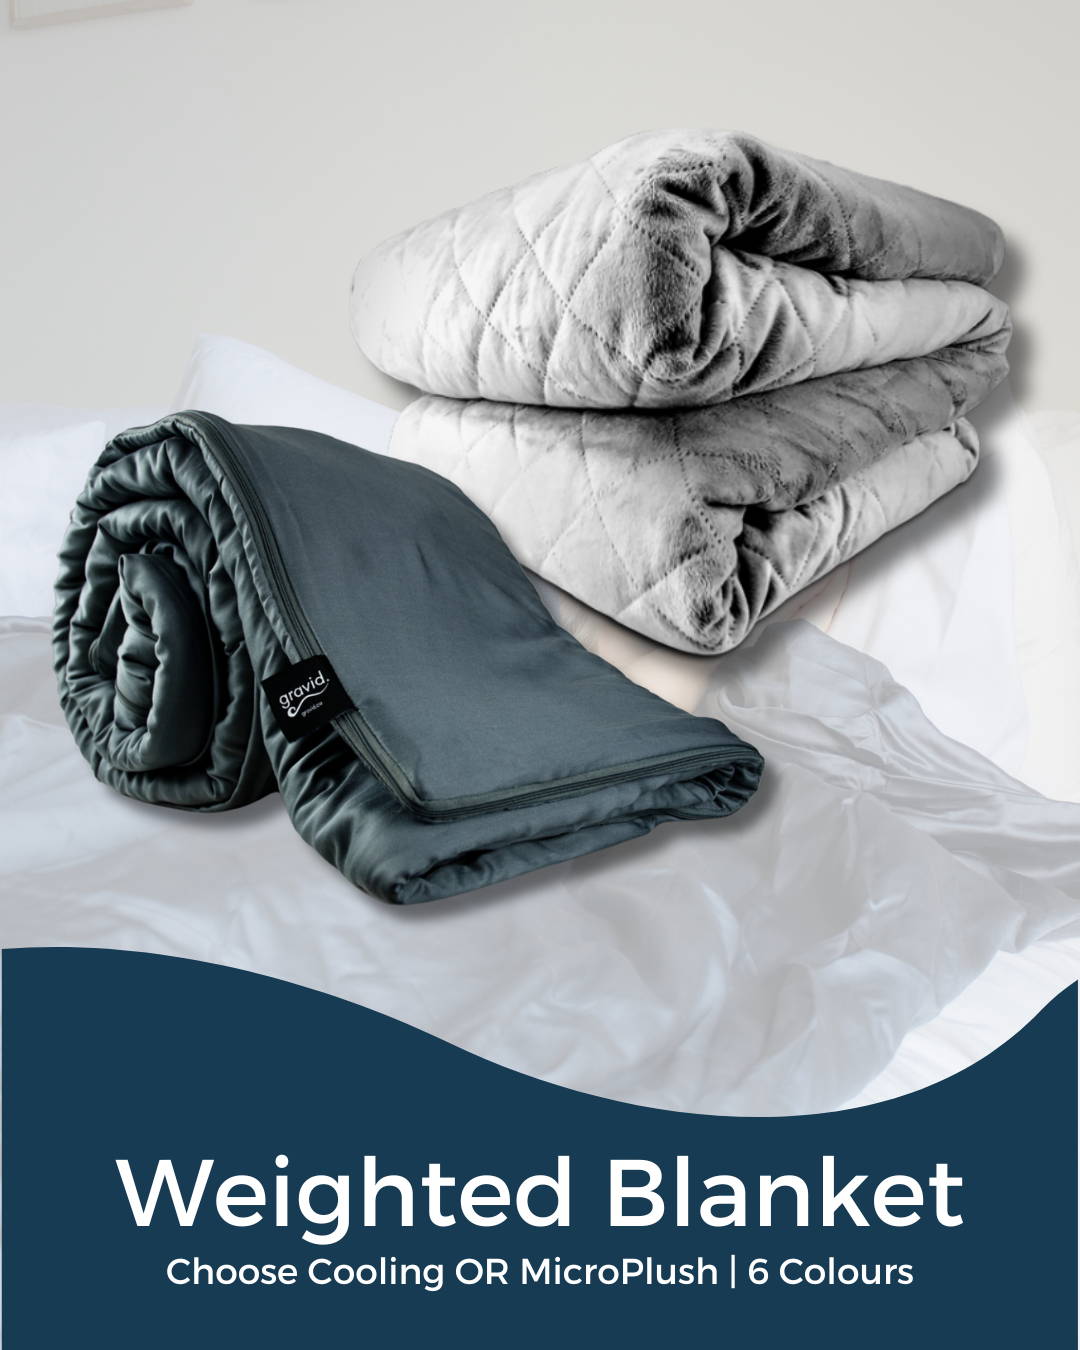 Gravid Weighted Blanket with One Cover